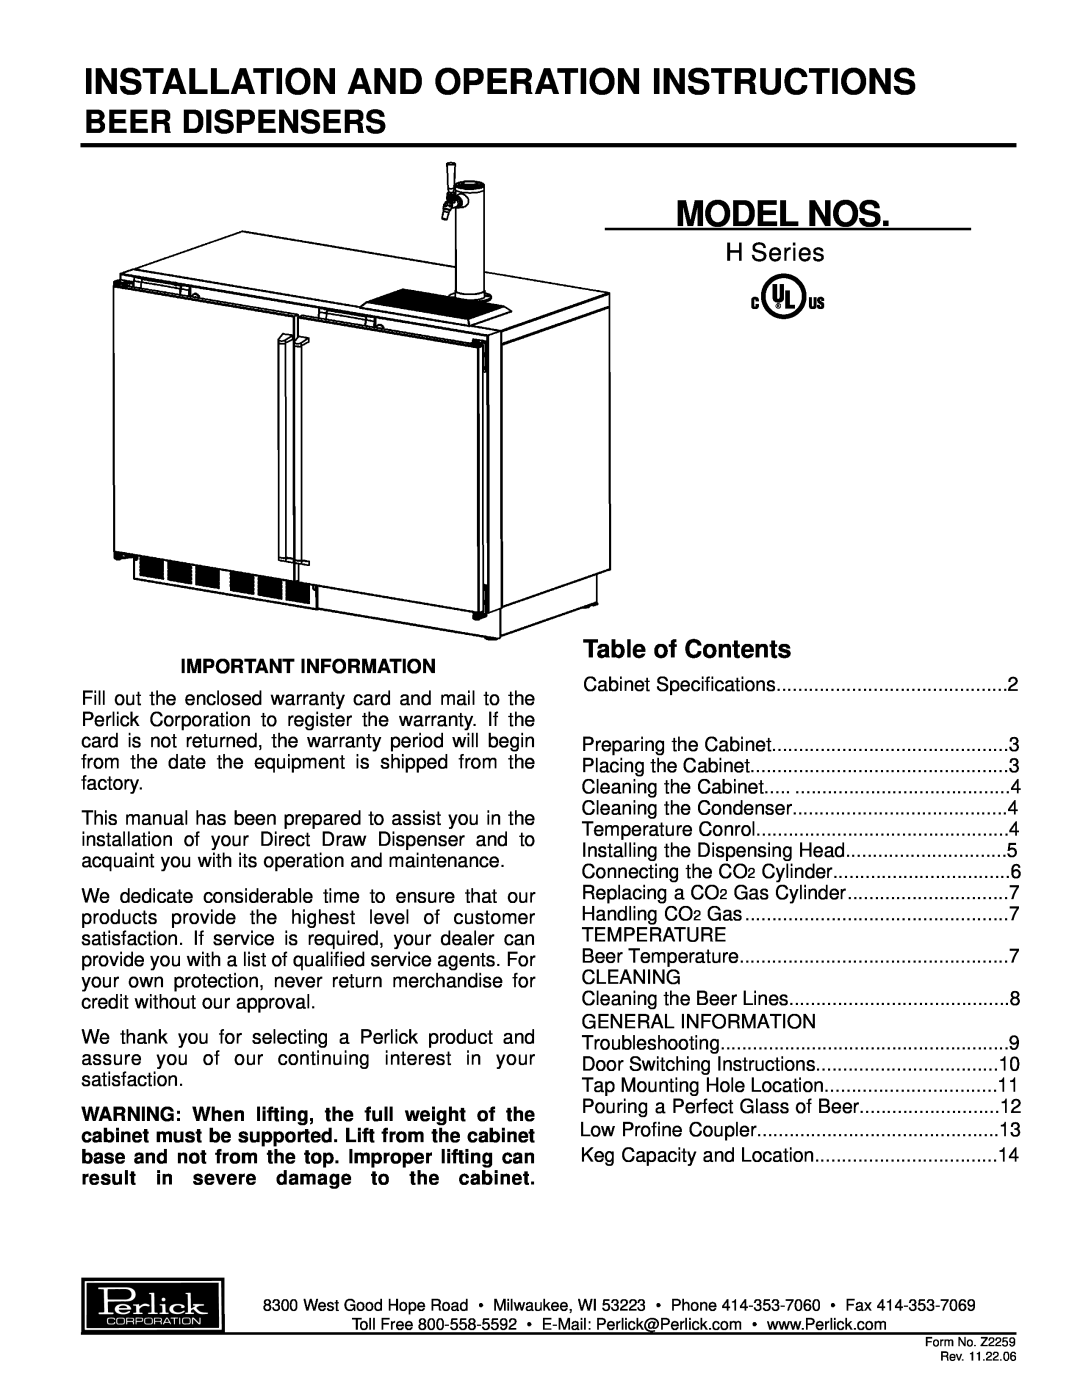 Perlick H Series warranty Installation And Operation Instructions, Model Nos, Beer Dispensers, Table of Contents 